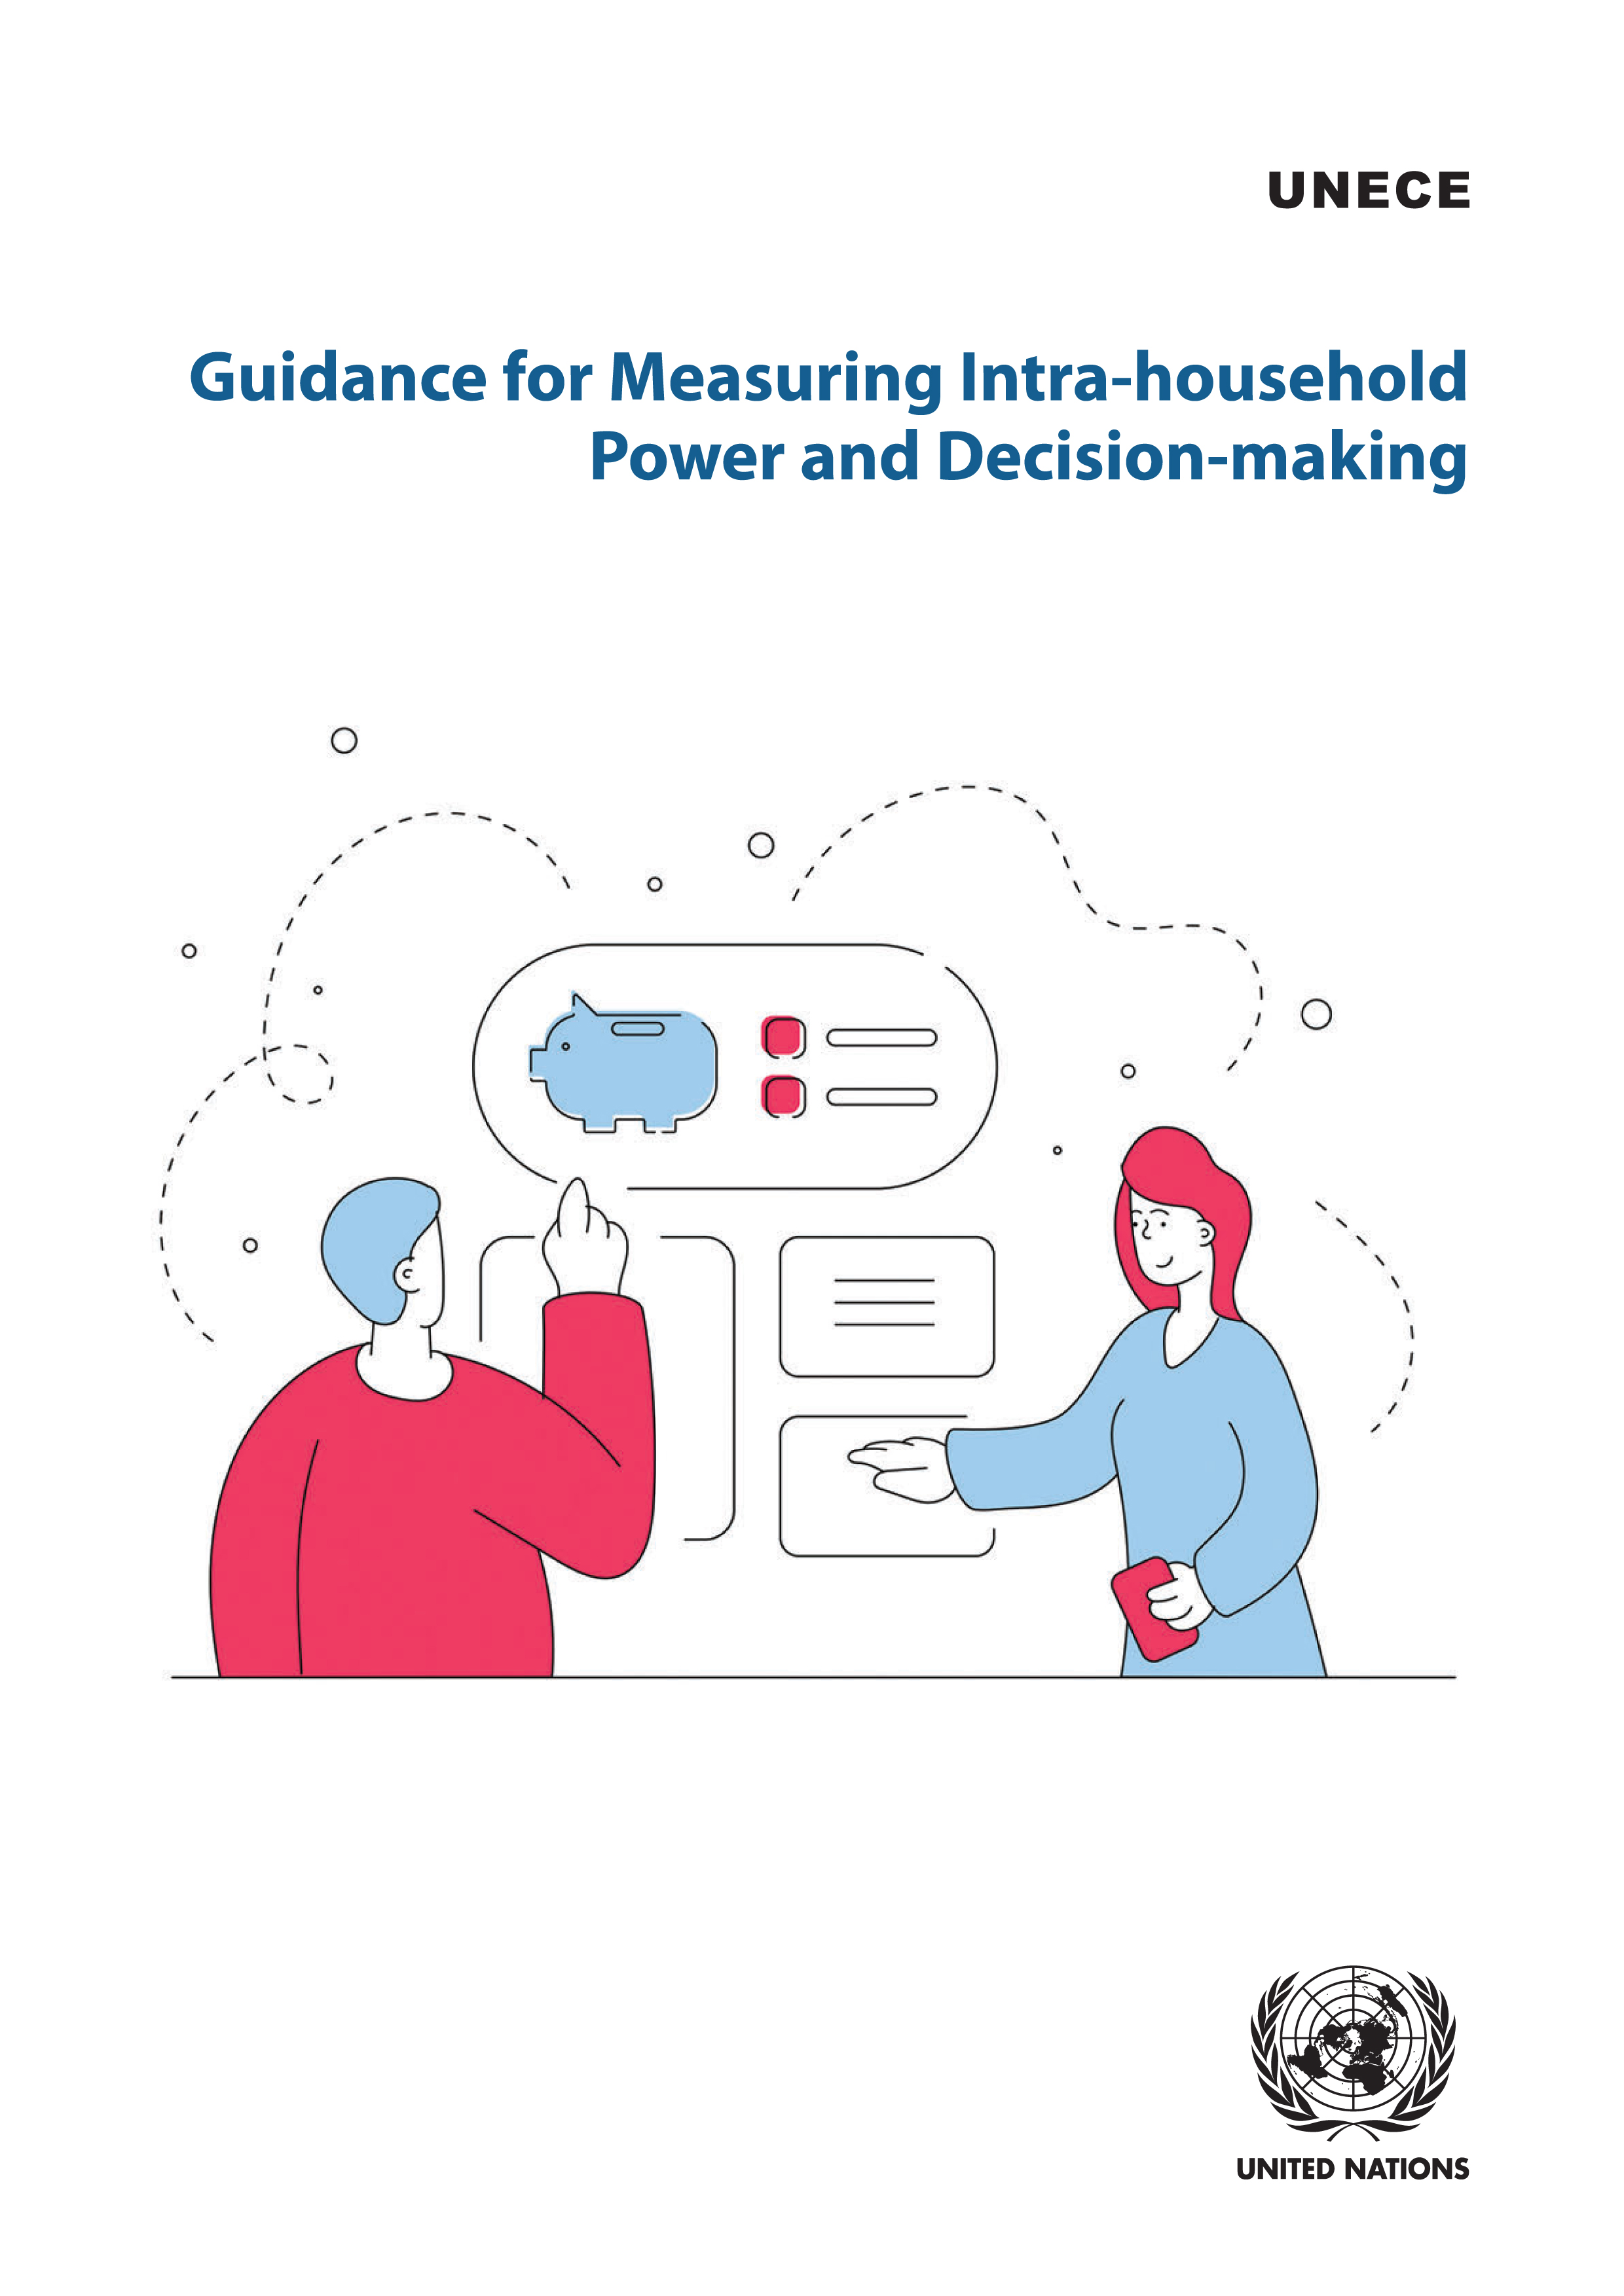 image of Guidance for Measuring Intra-household Power and Decision-making